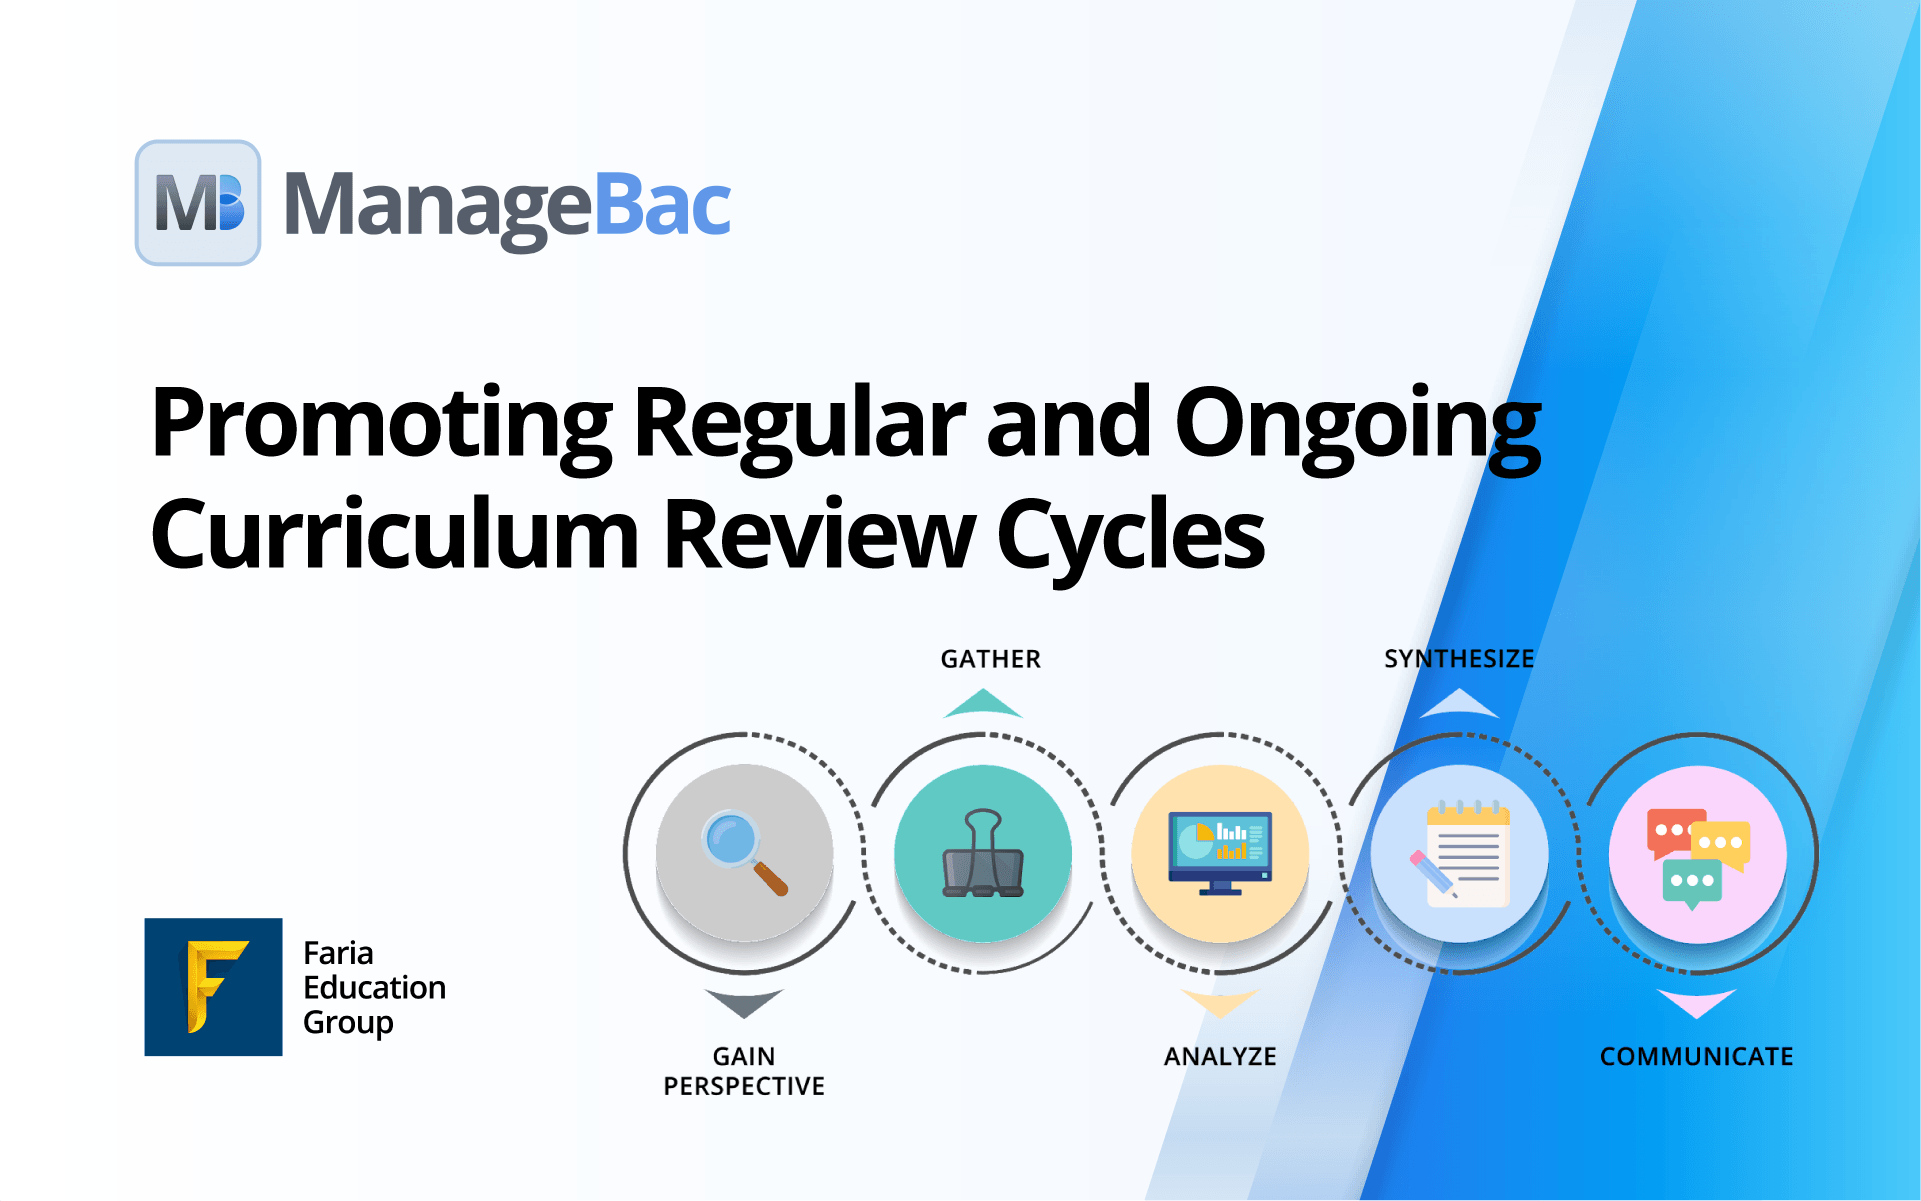 Promoting Regular and Ongoing Curriculum Review Cycles